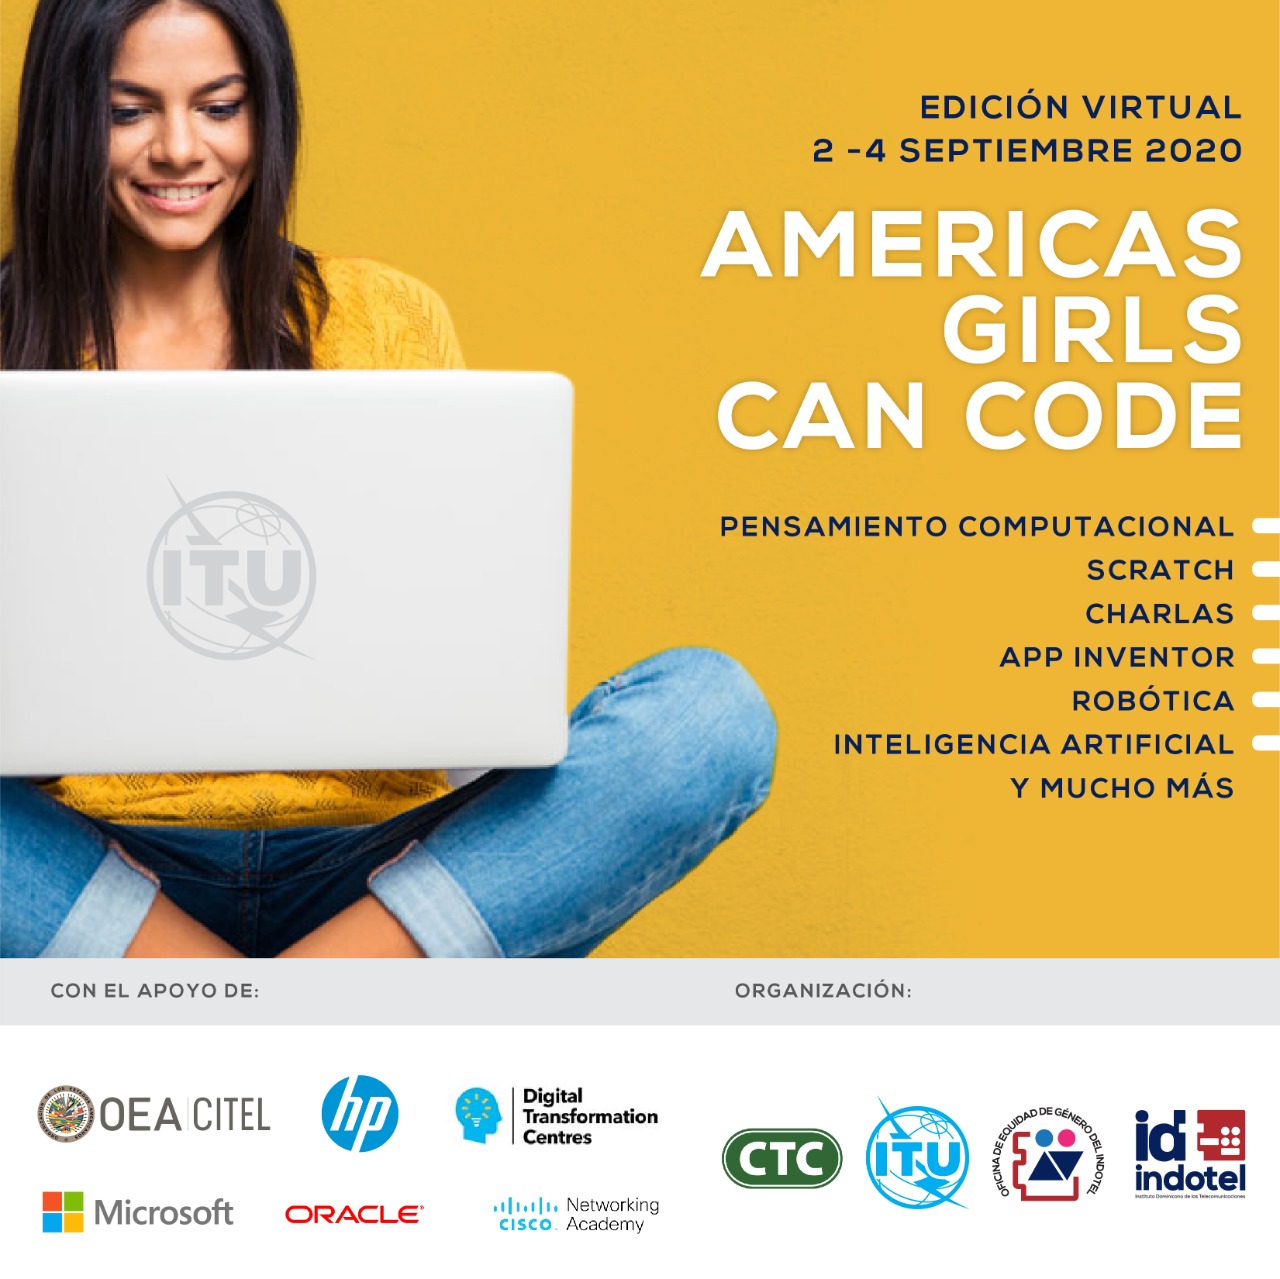  INDOTEL Americas Girls Can Code..